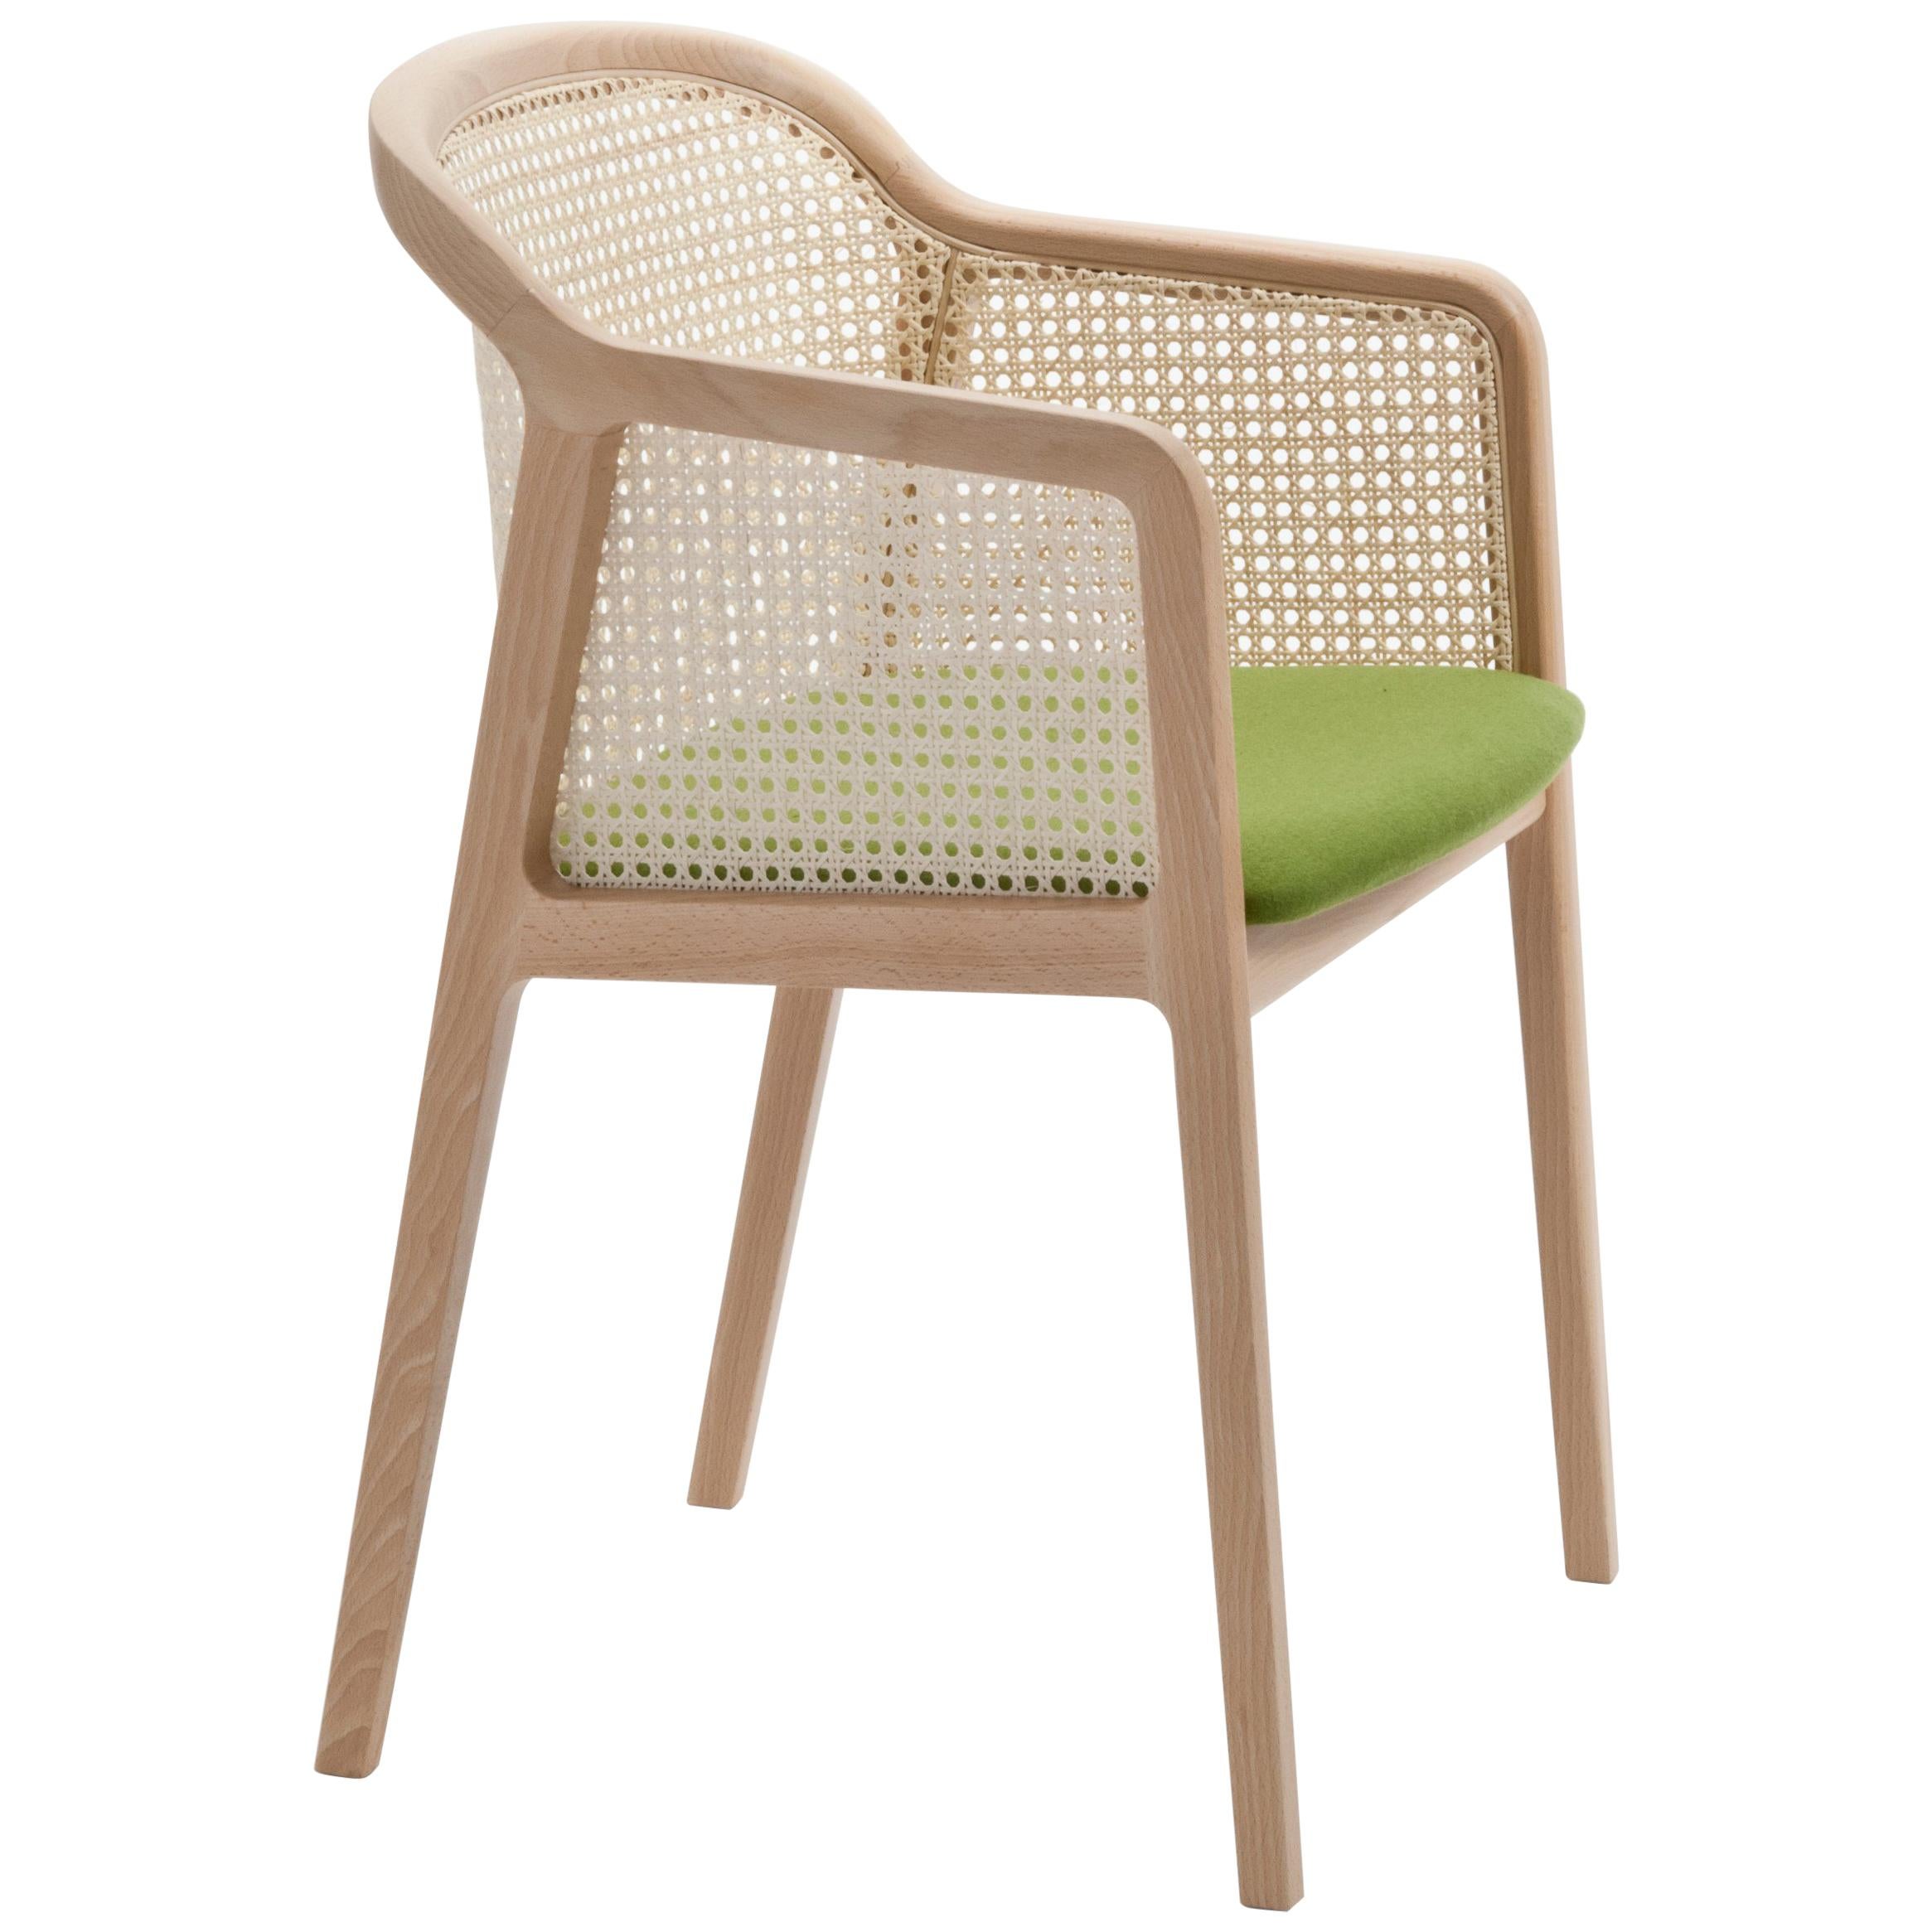 Vienna Armchair by Colé, Modern Design in Wood and Straw, Green Upholstered Seat